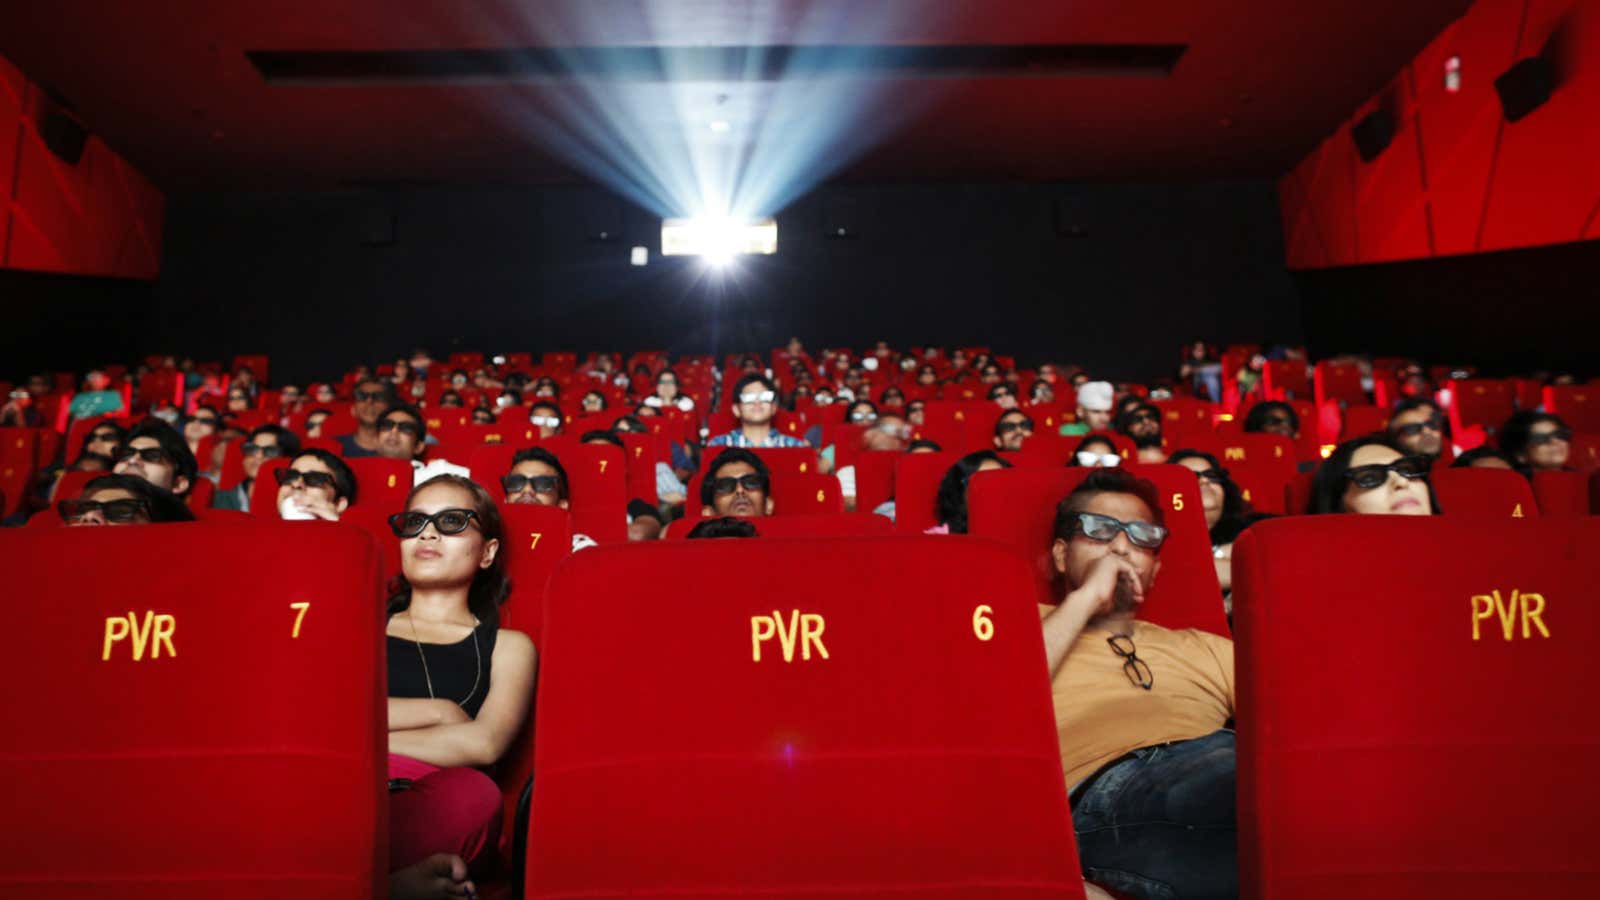 In recent years, the market for Hollywood films in India has been on the rise.